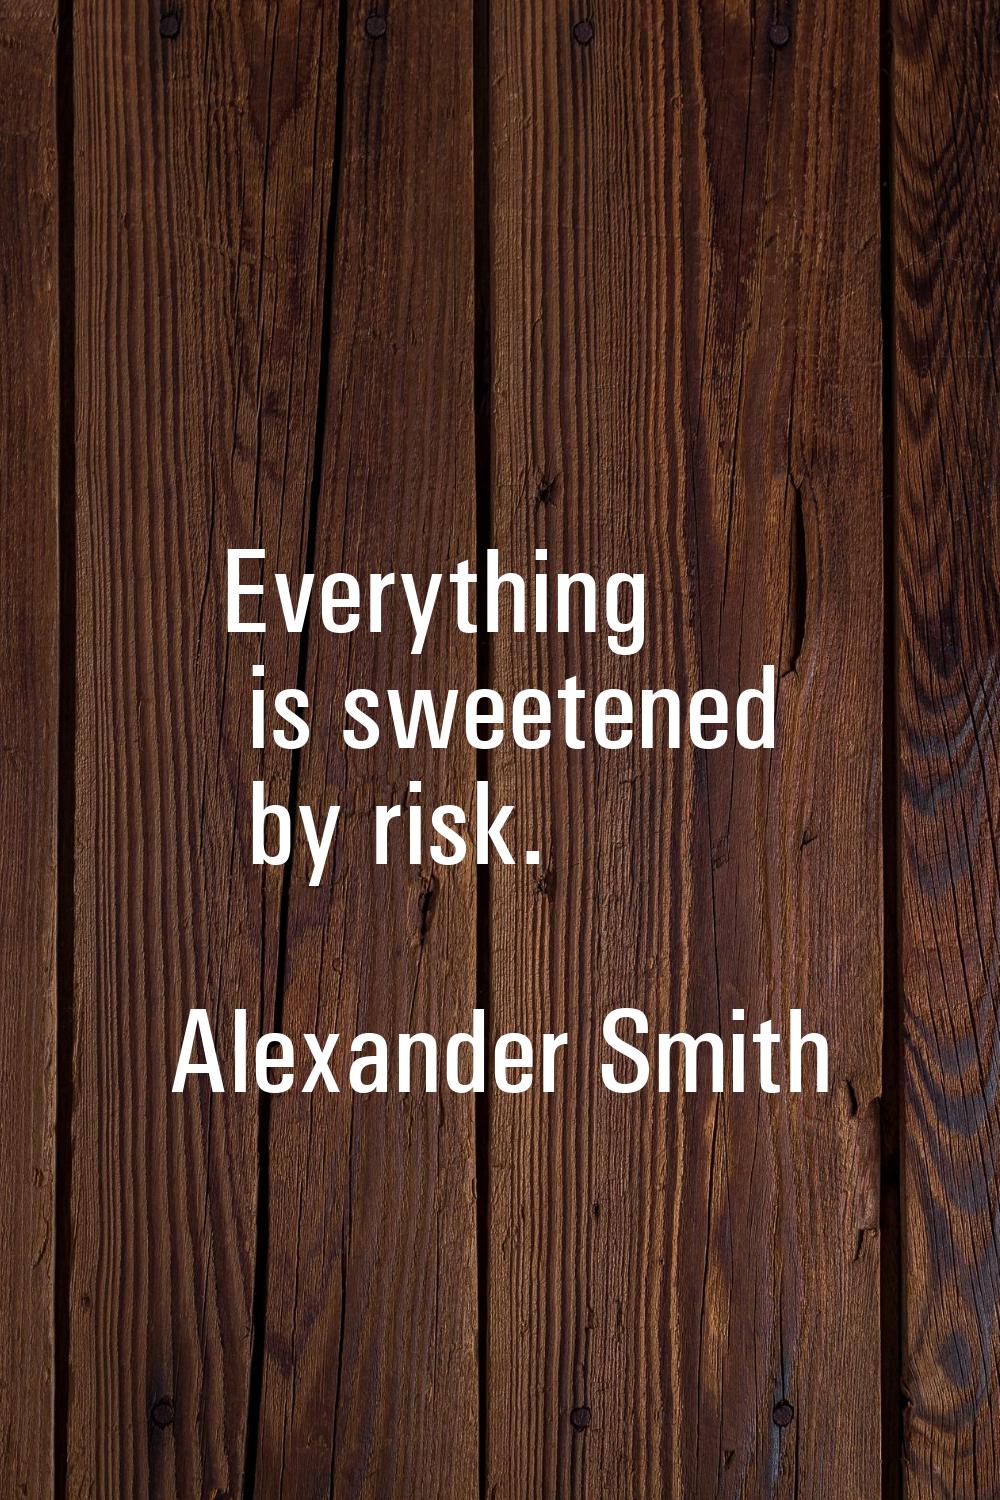 Everything is sweetened by risk.